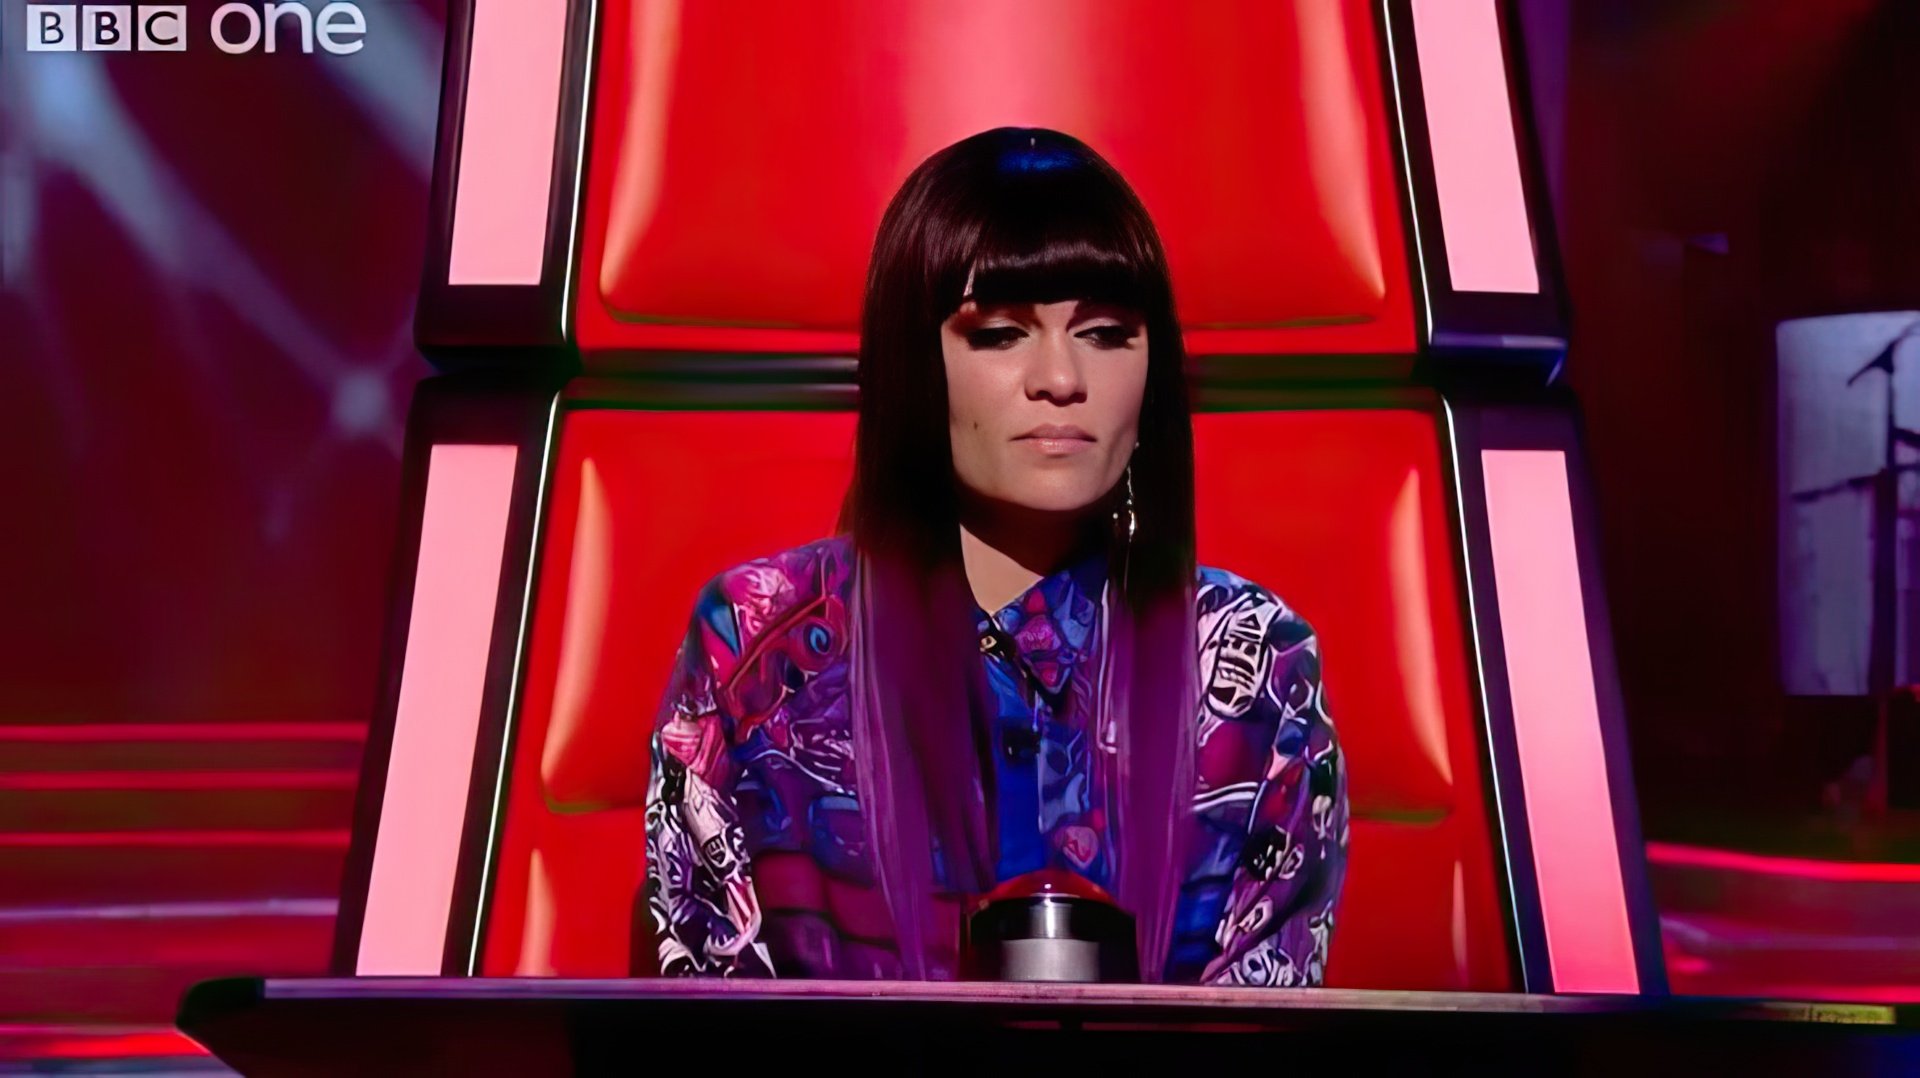 Jessie J was one of the coaches on the television show The Voice UK